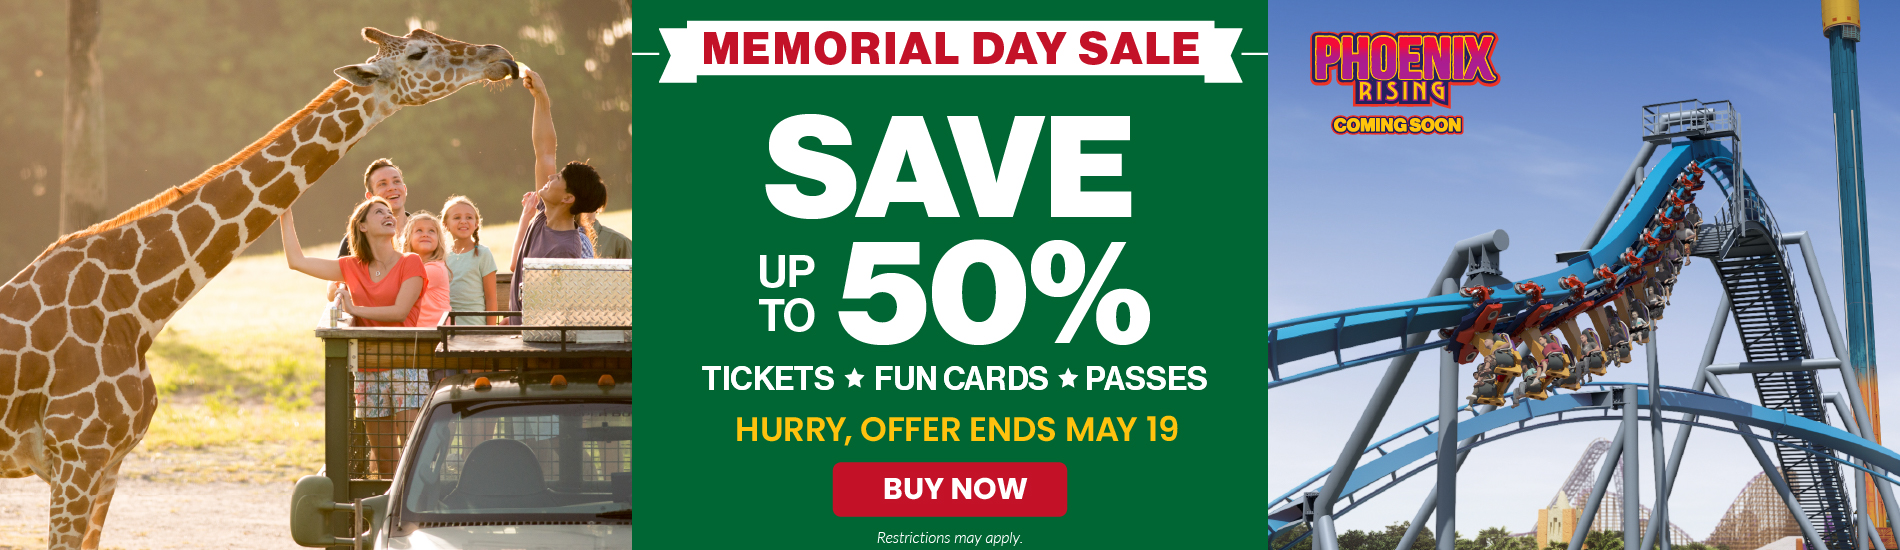 Memorial Sale - Save up to 50%